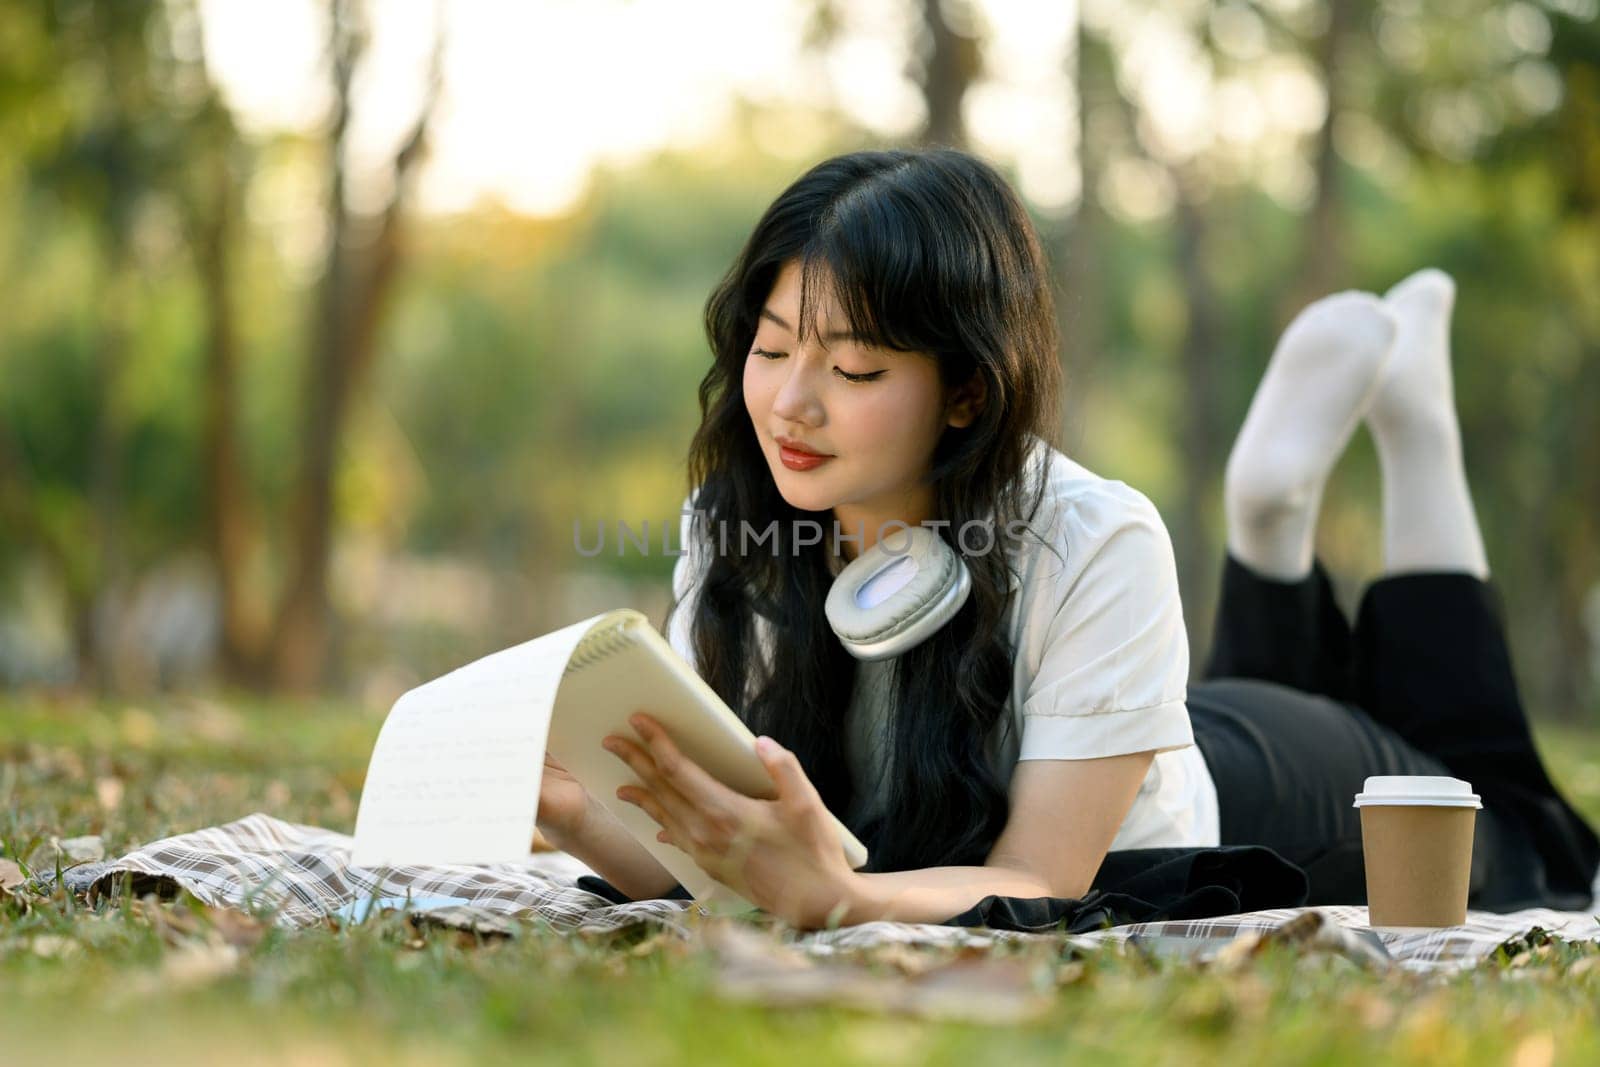 Peaceful young woman relaxing on green grass and reading book.